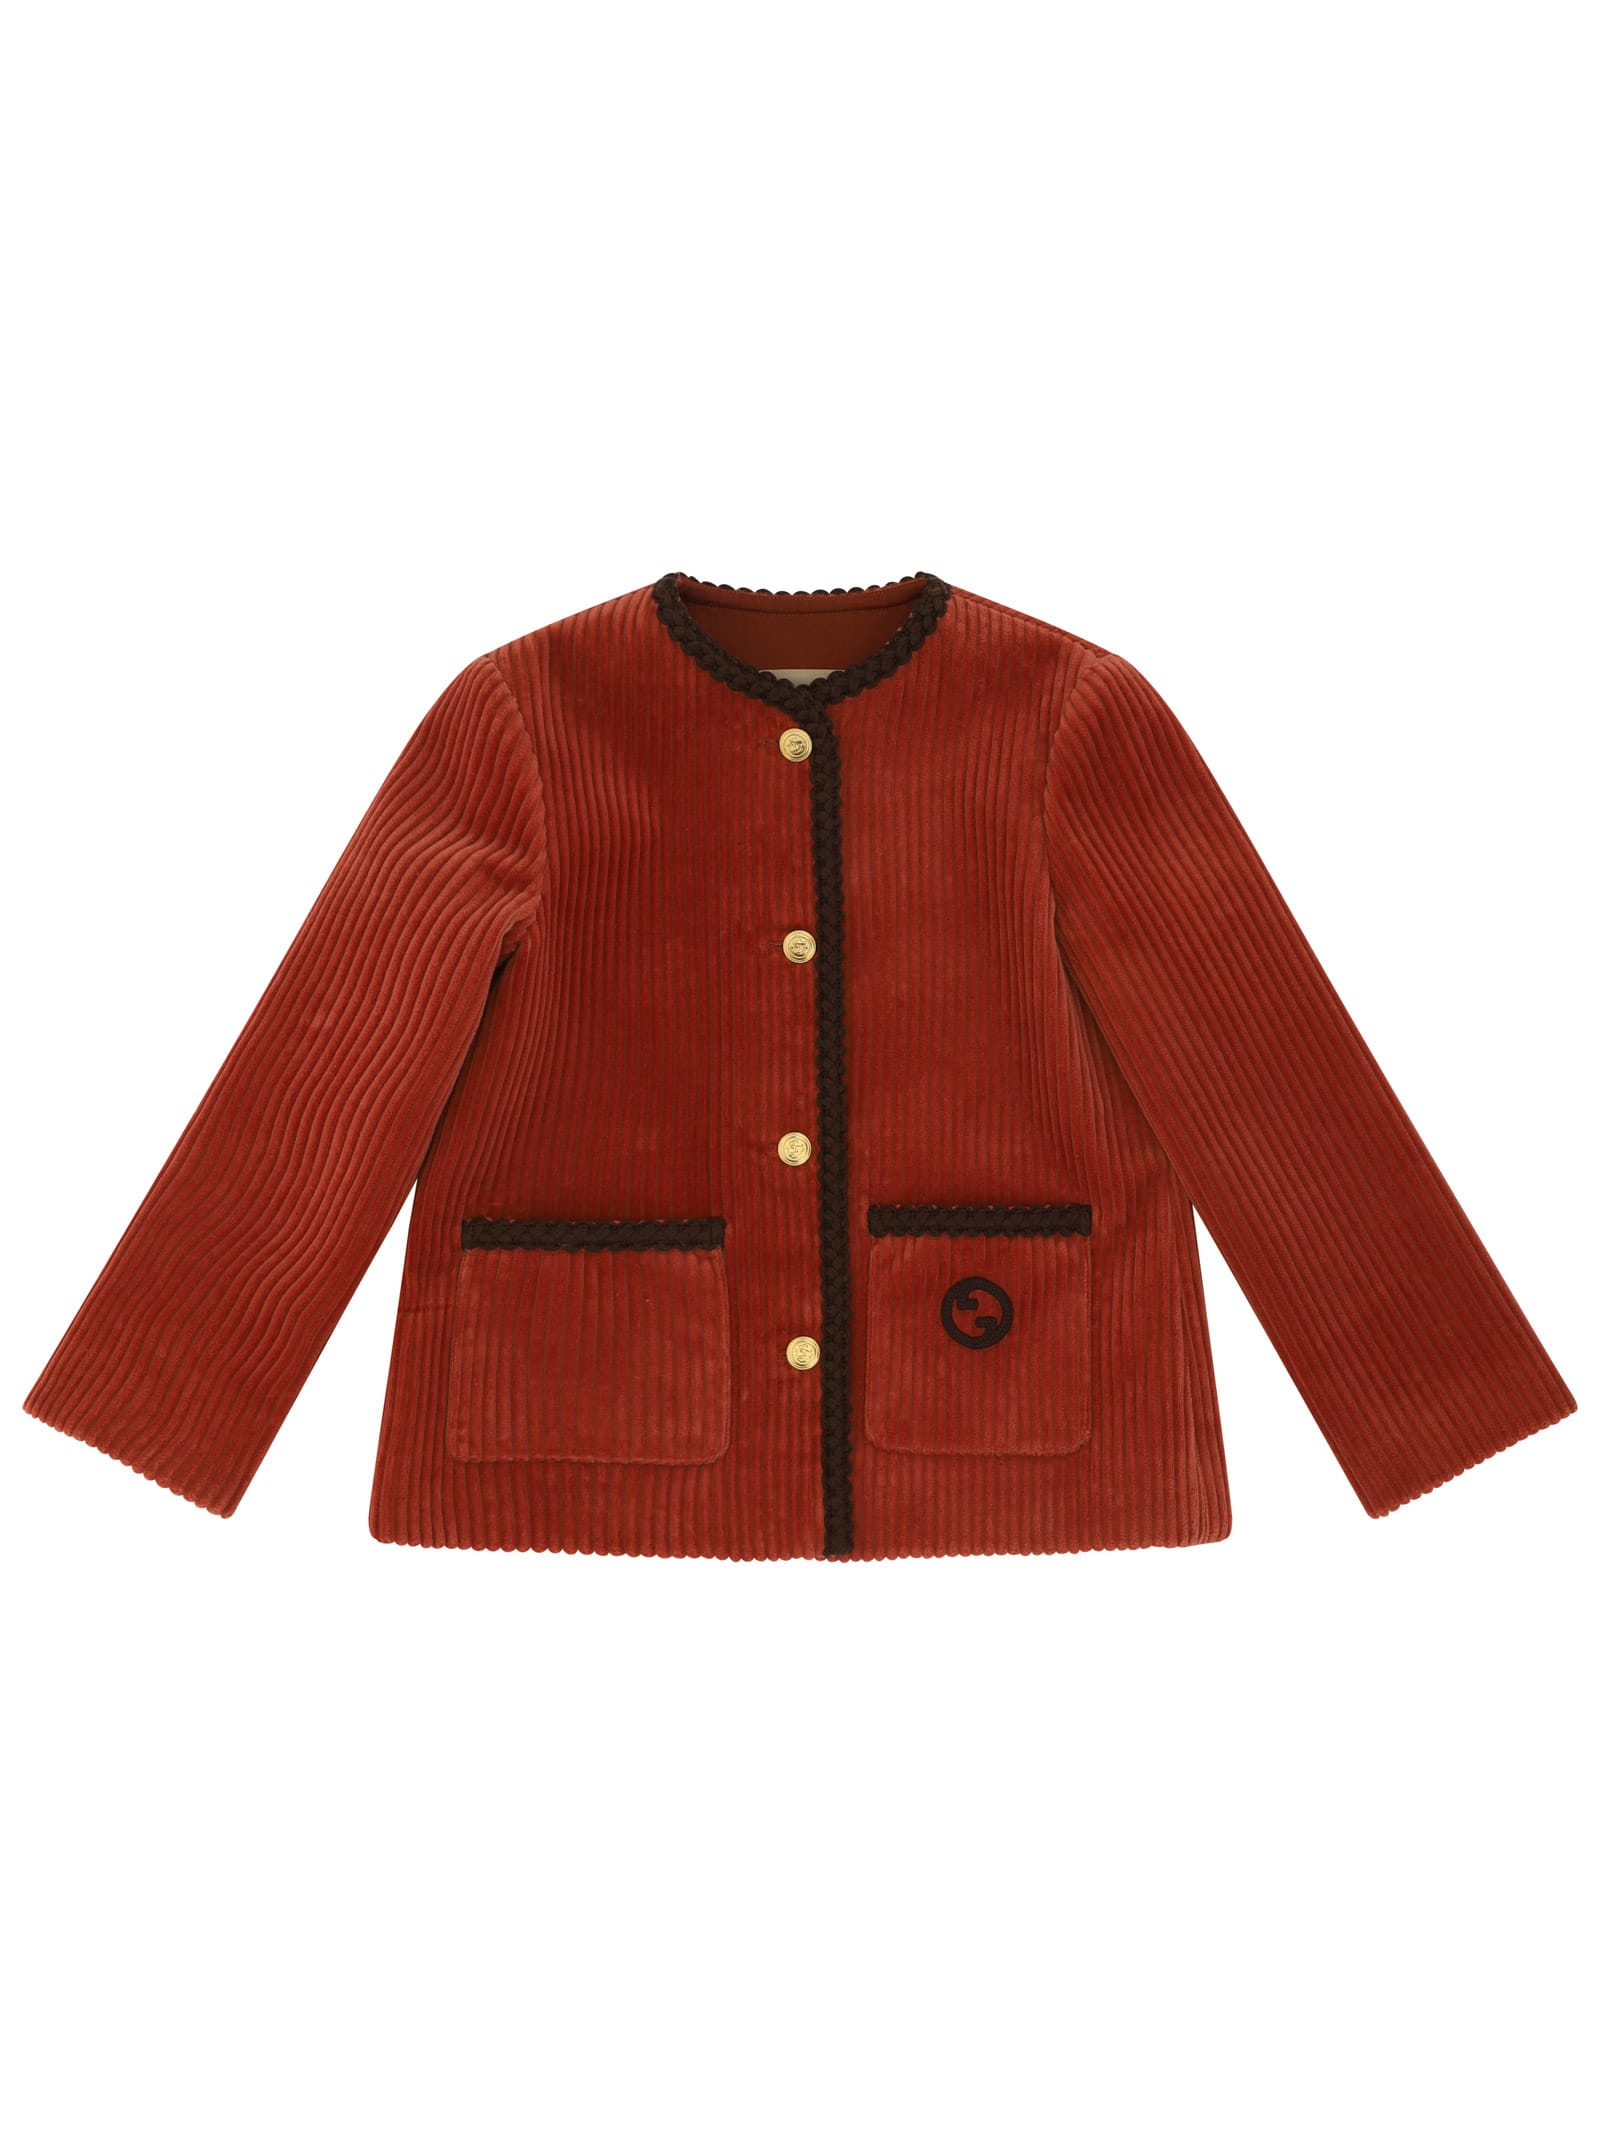 Gucci Kids' Jacket For Boy In Brown